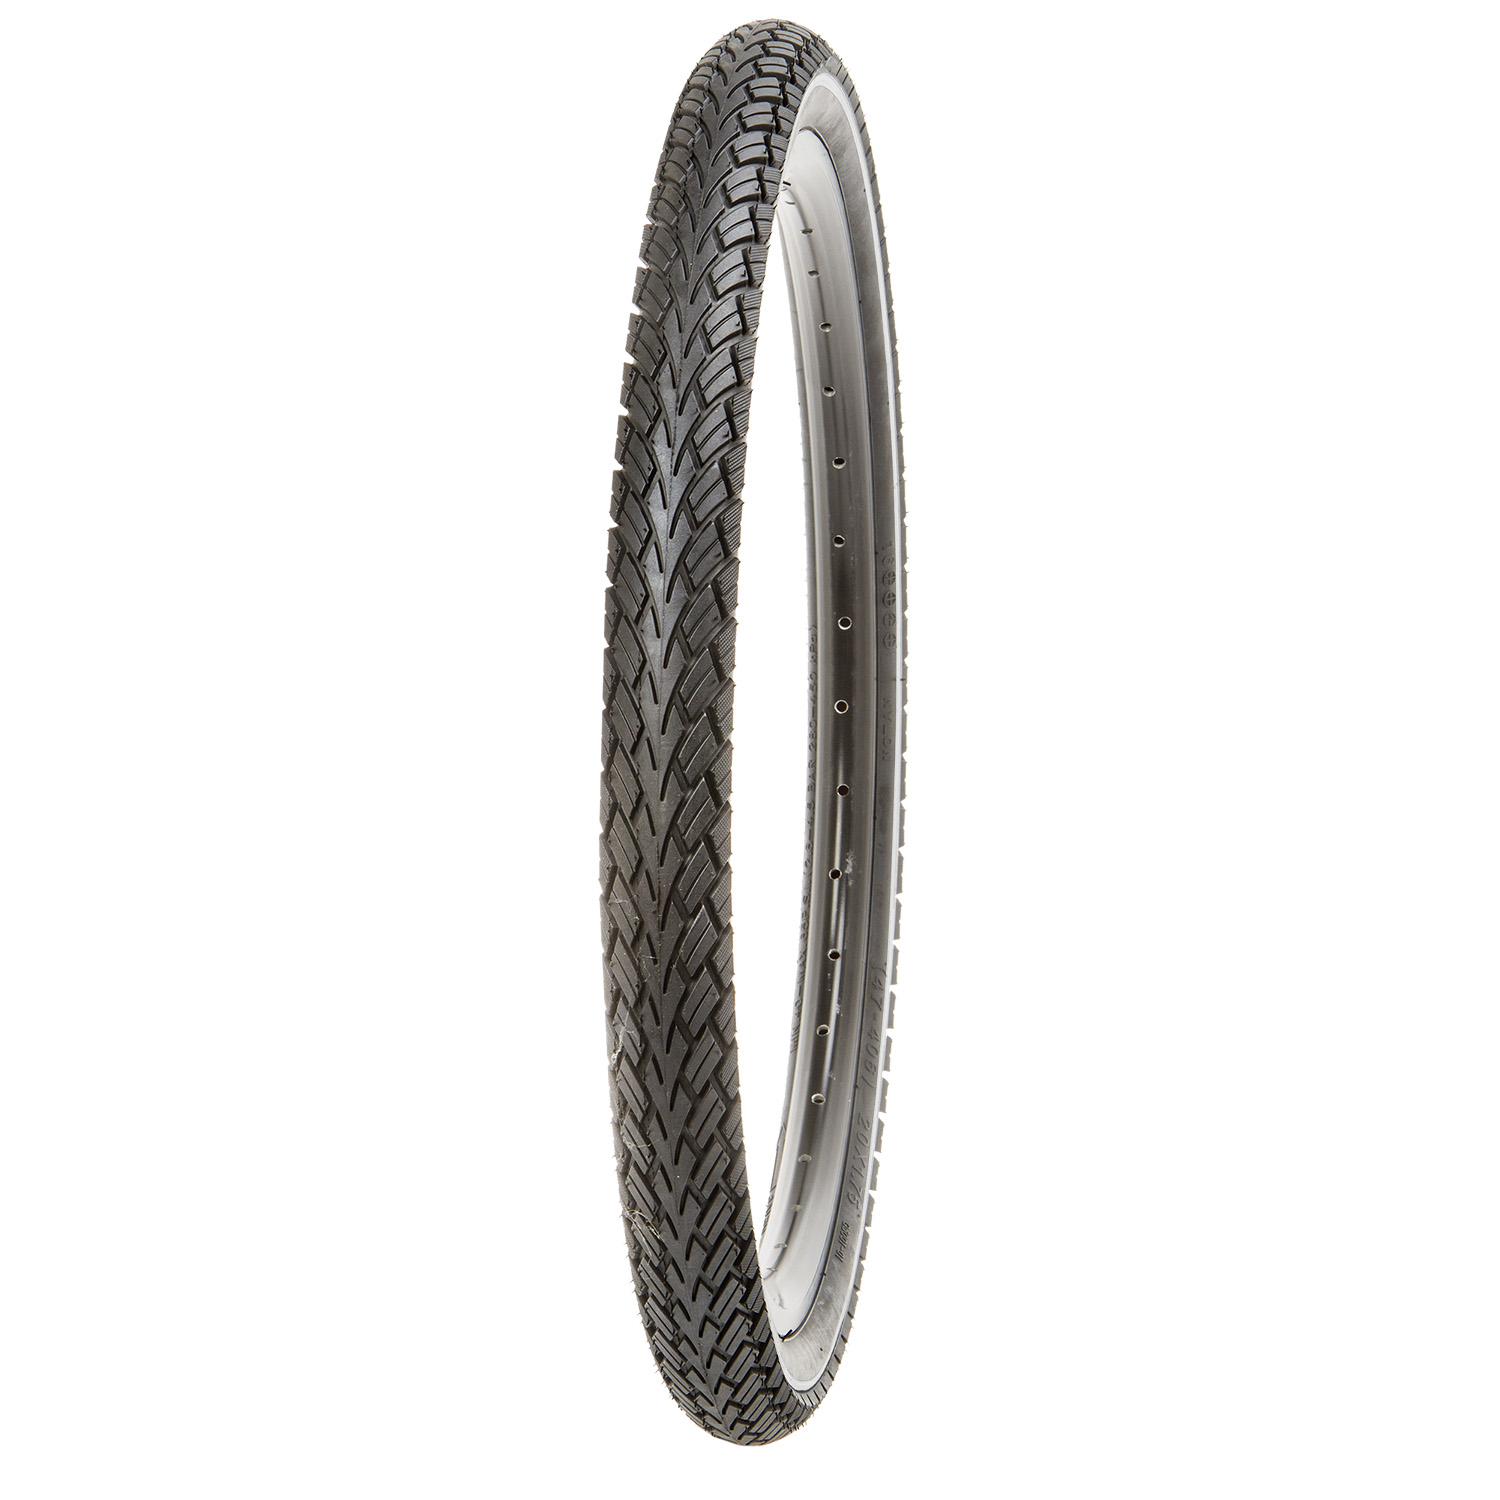 KUJO One 0 One A 28 x 1.60″ Clincher – AVAILABLE IN SELECTED BIKE SHOPS